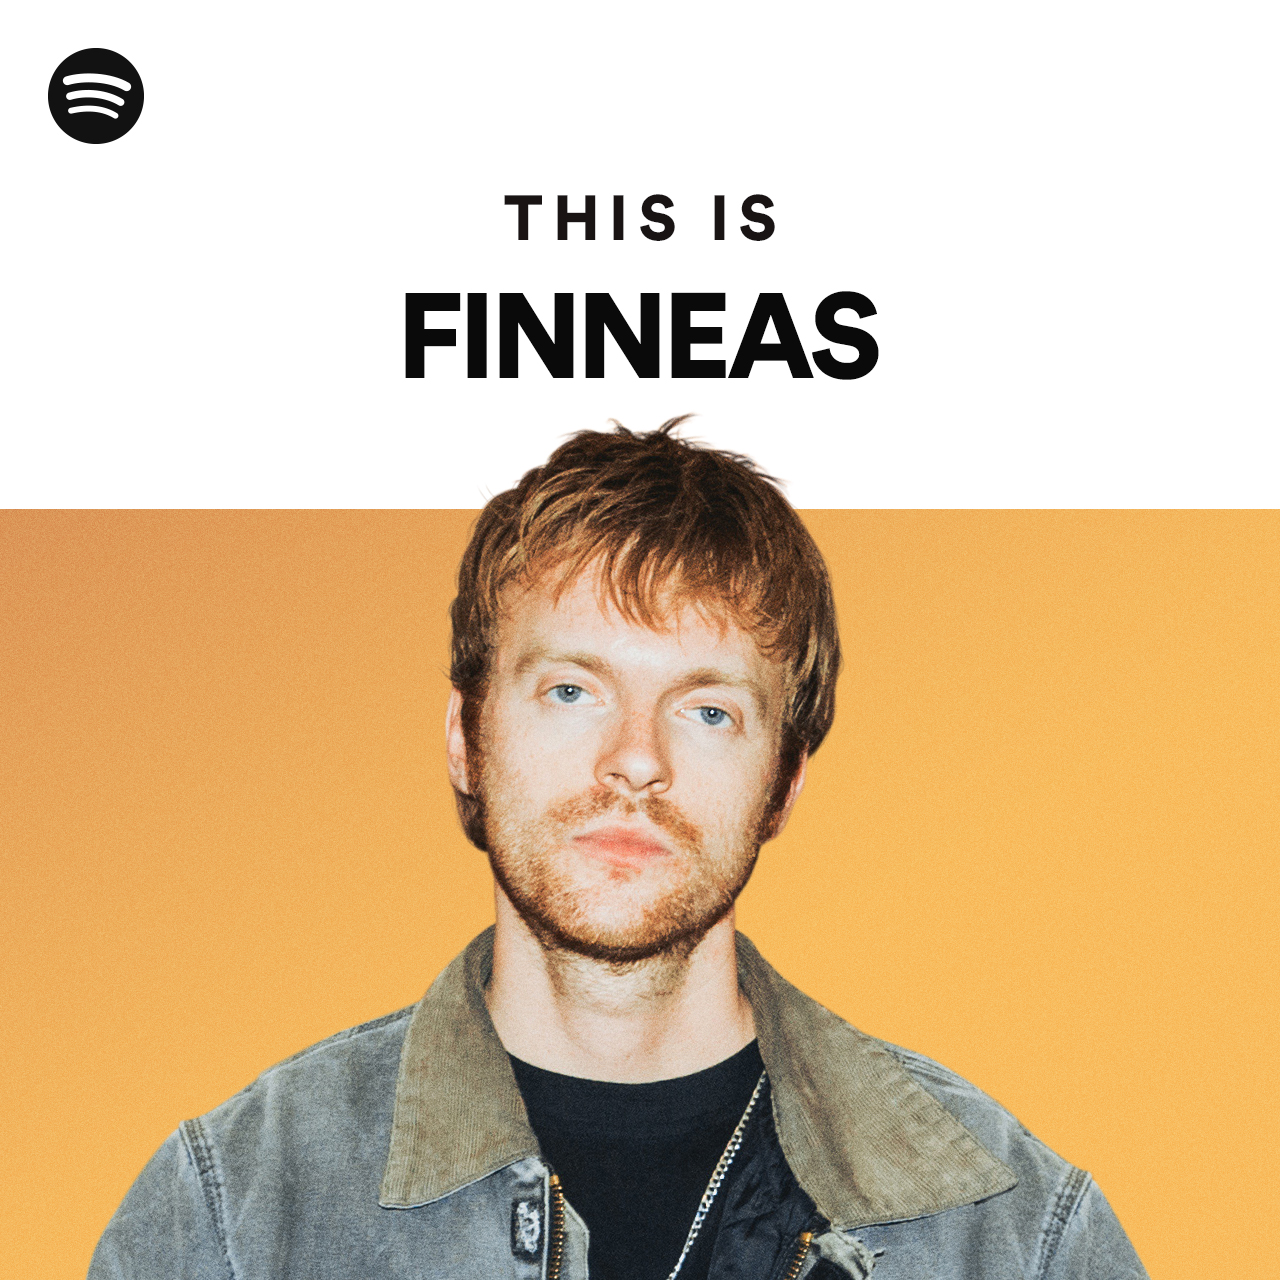 This Is FINNEAS